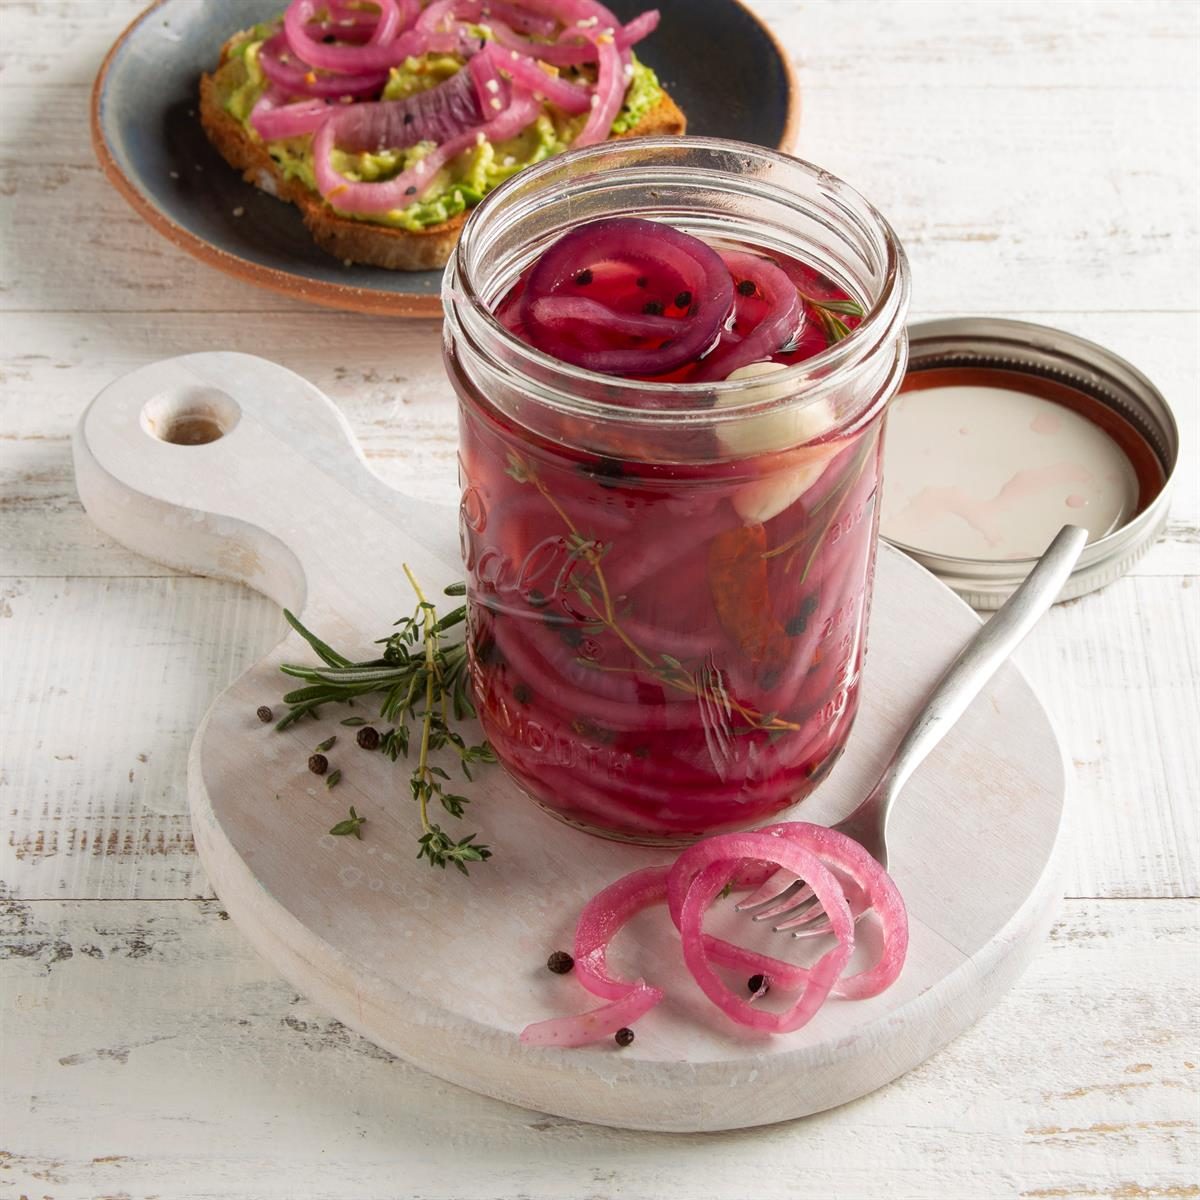 Best Pickled Red Onions Recipe - How To Make Pickled Red Onions